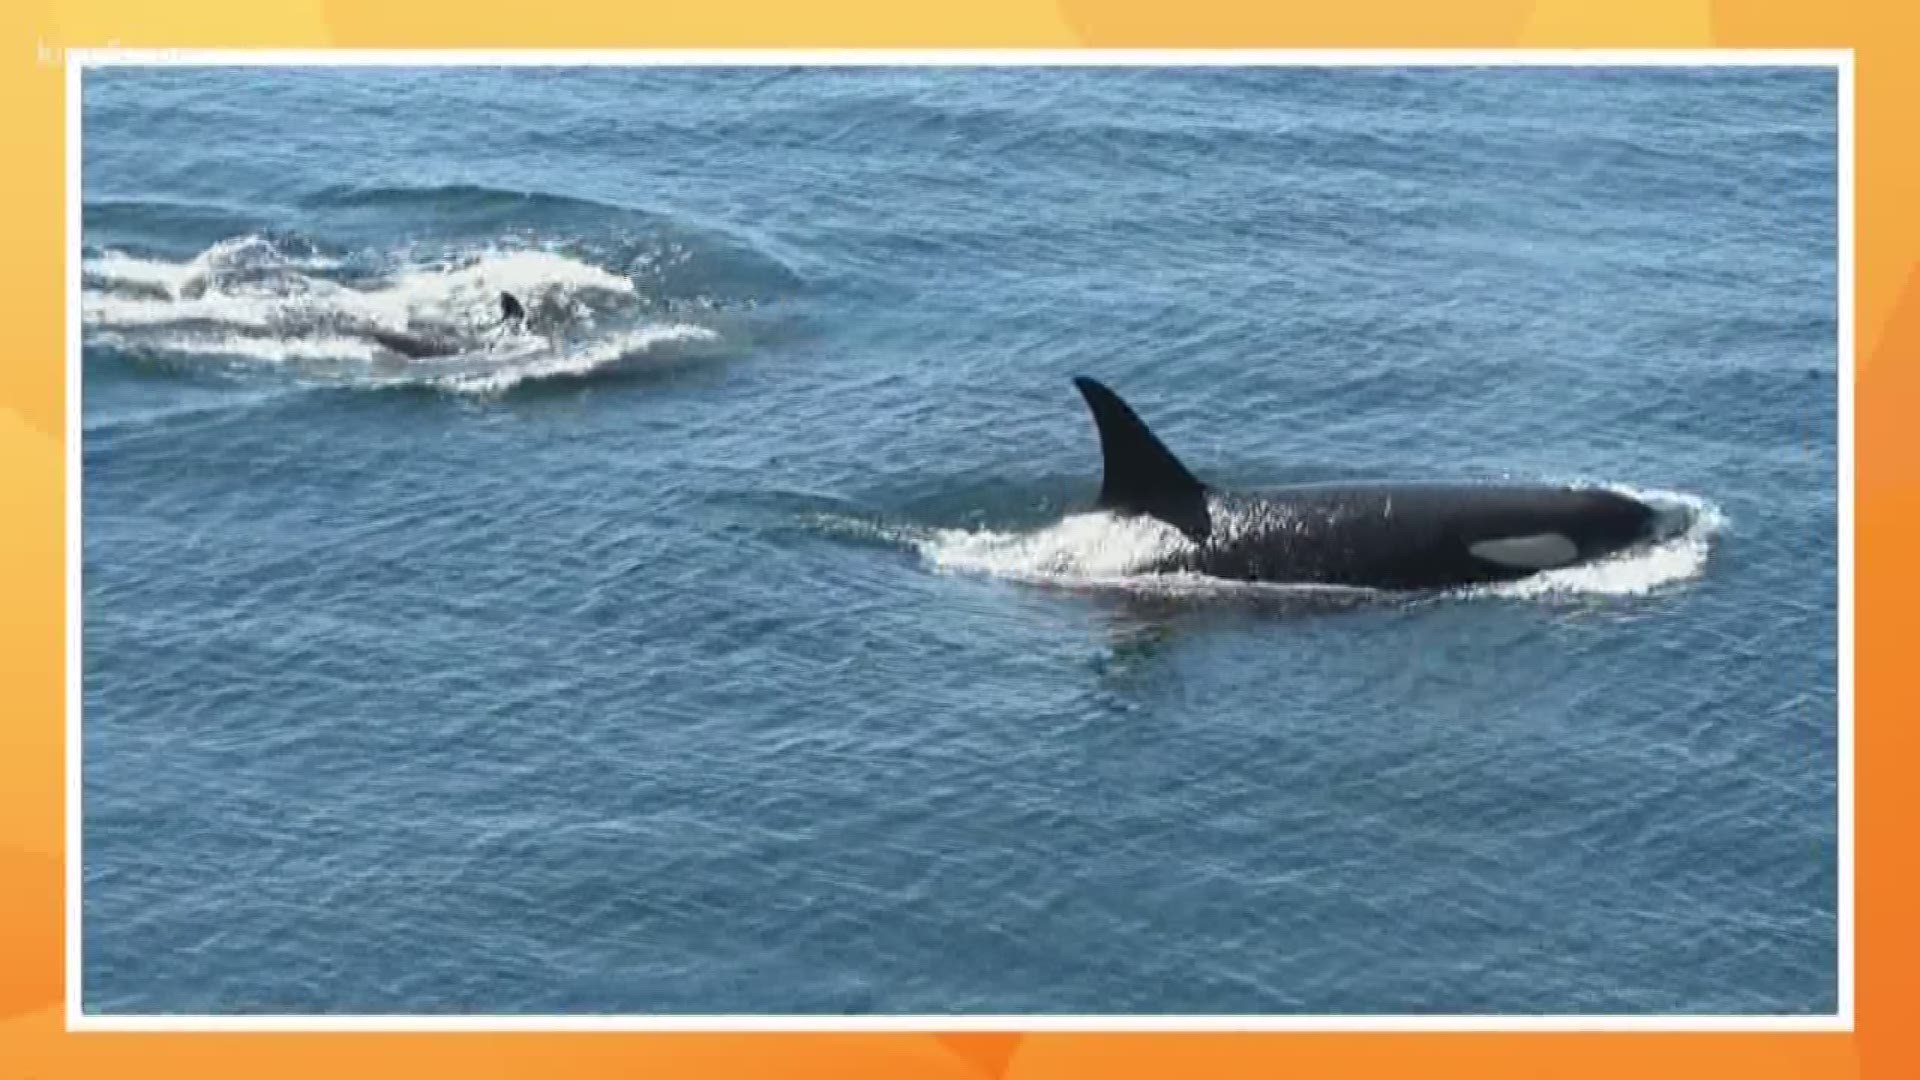 KING 5's Alison Morrow shares developments on young, ailing orca J-50, spotted alive in Puget Sound. Take 5 airs every weekday at 4 p.m. 